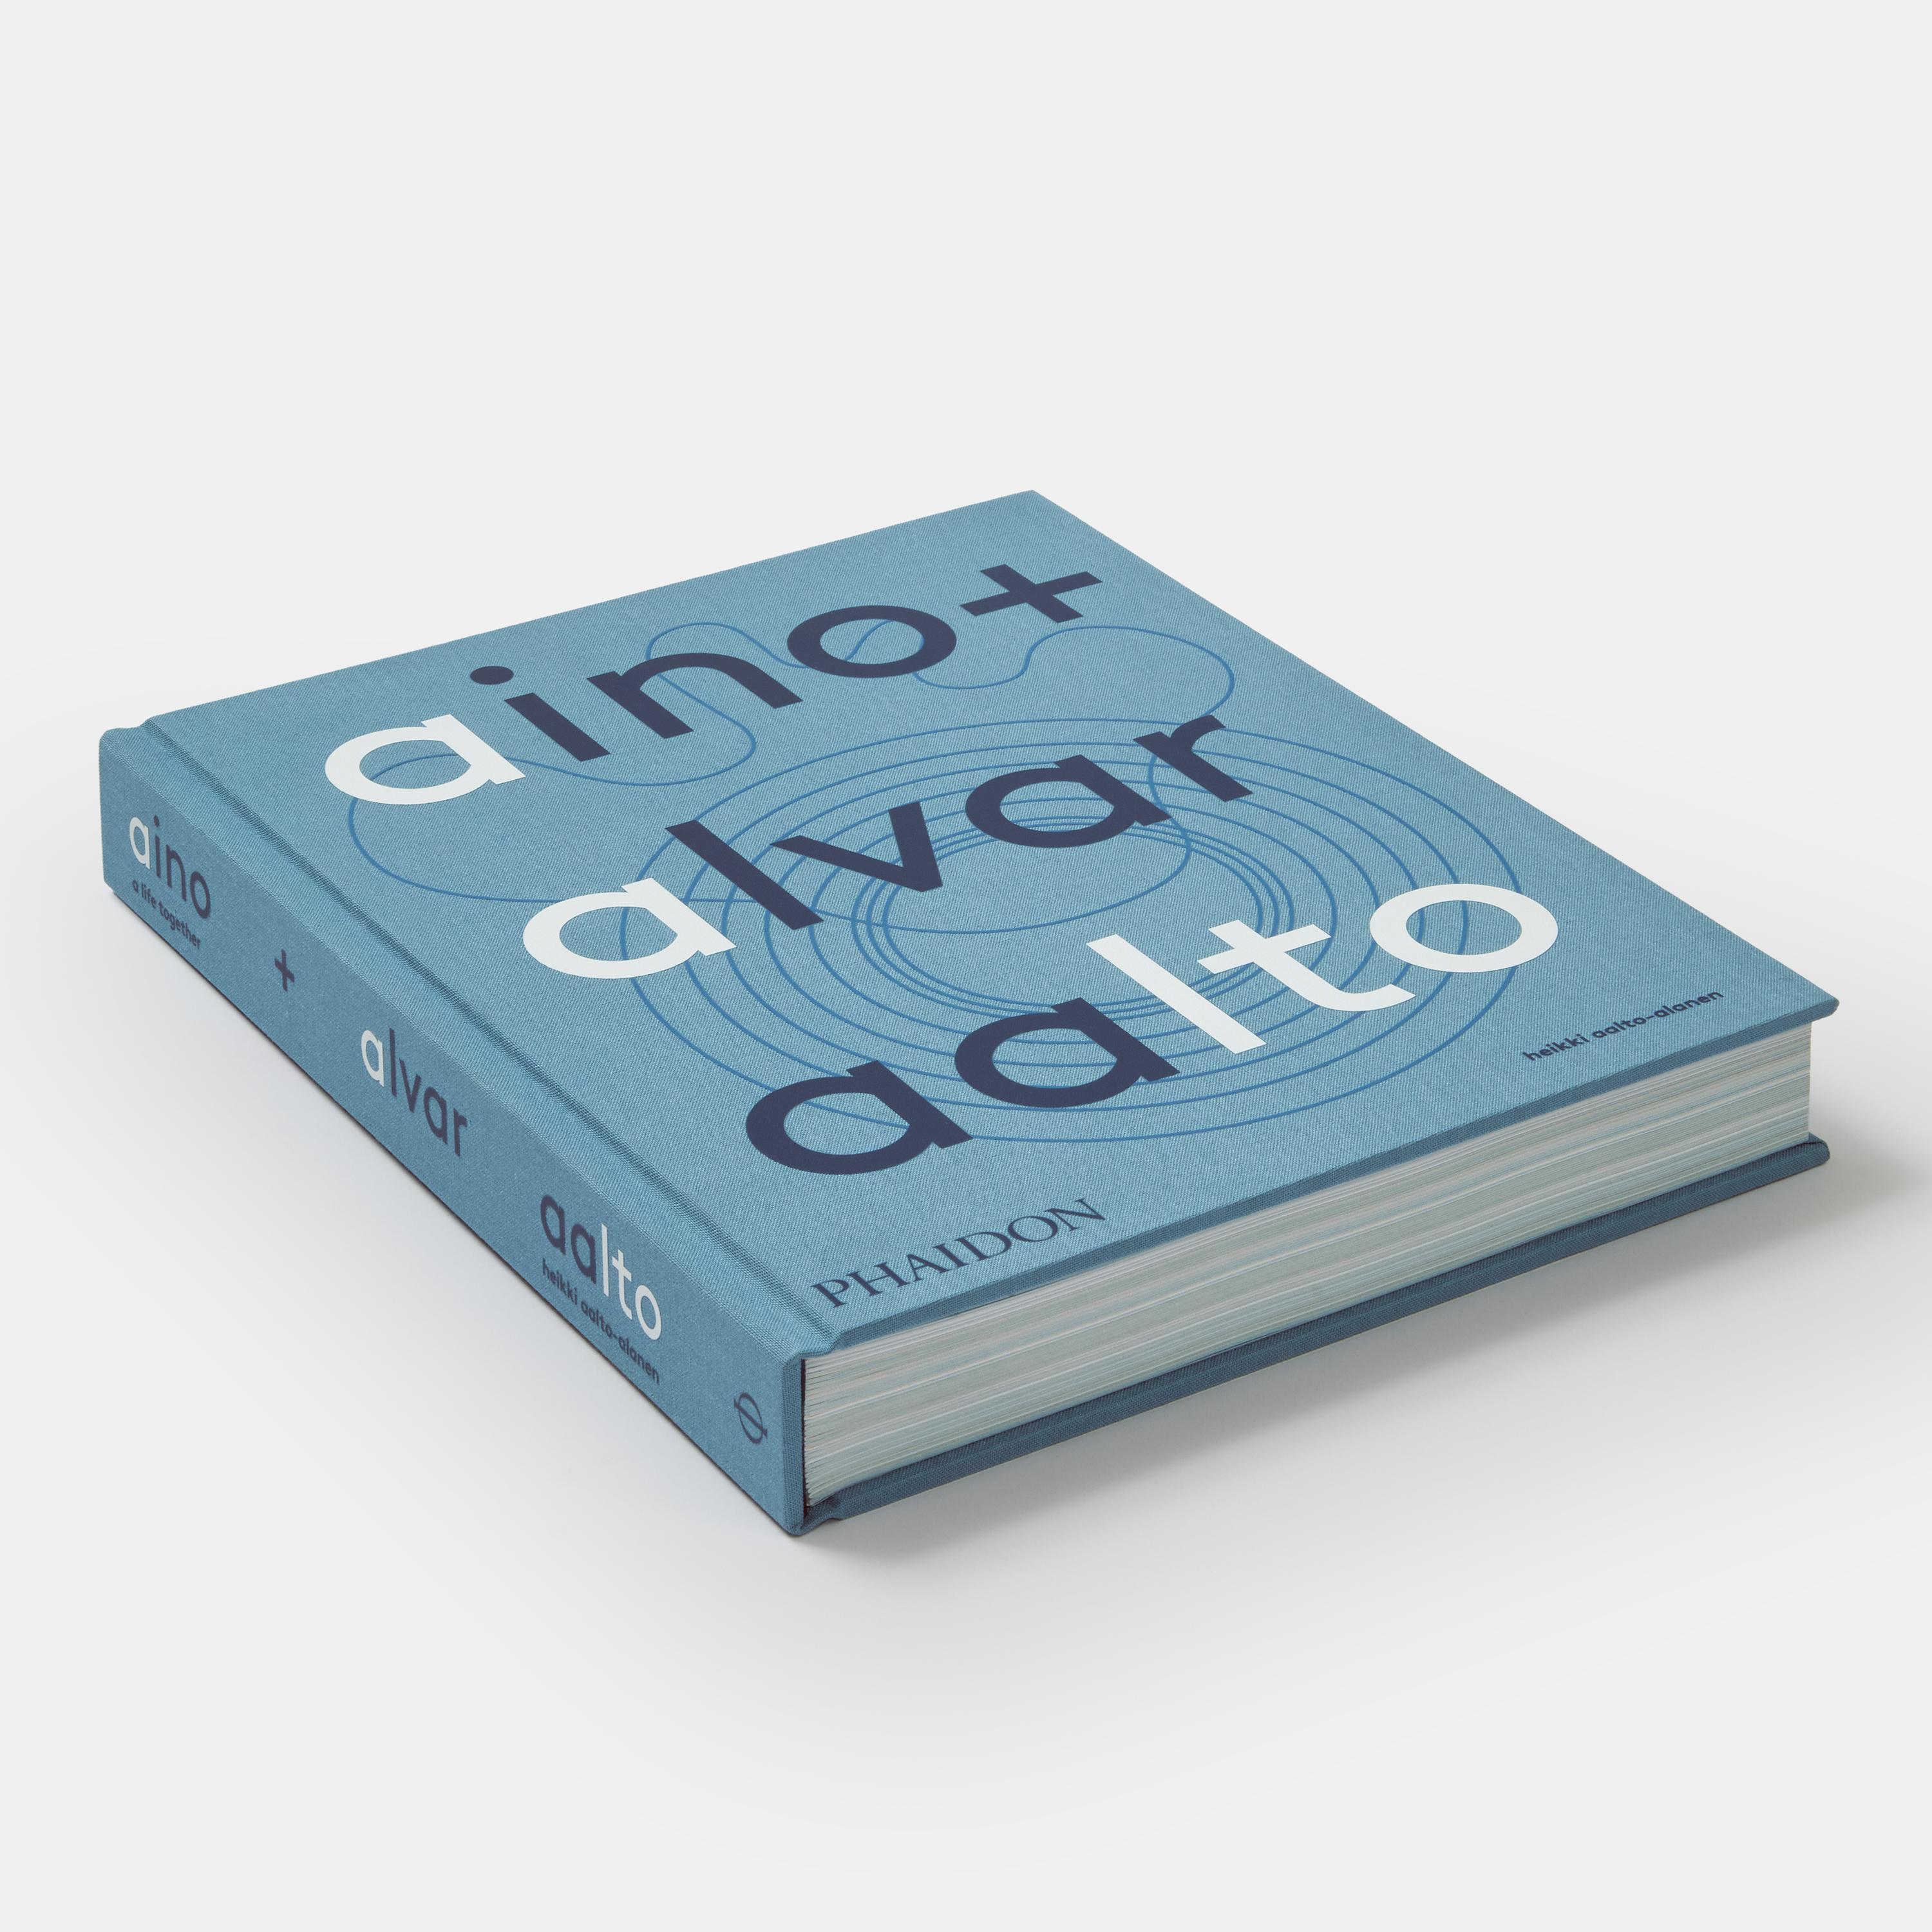 Chinese Aino + Alvar Aalto: A Life Together For Sale